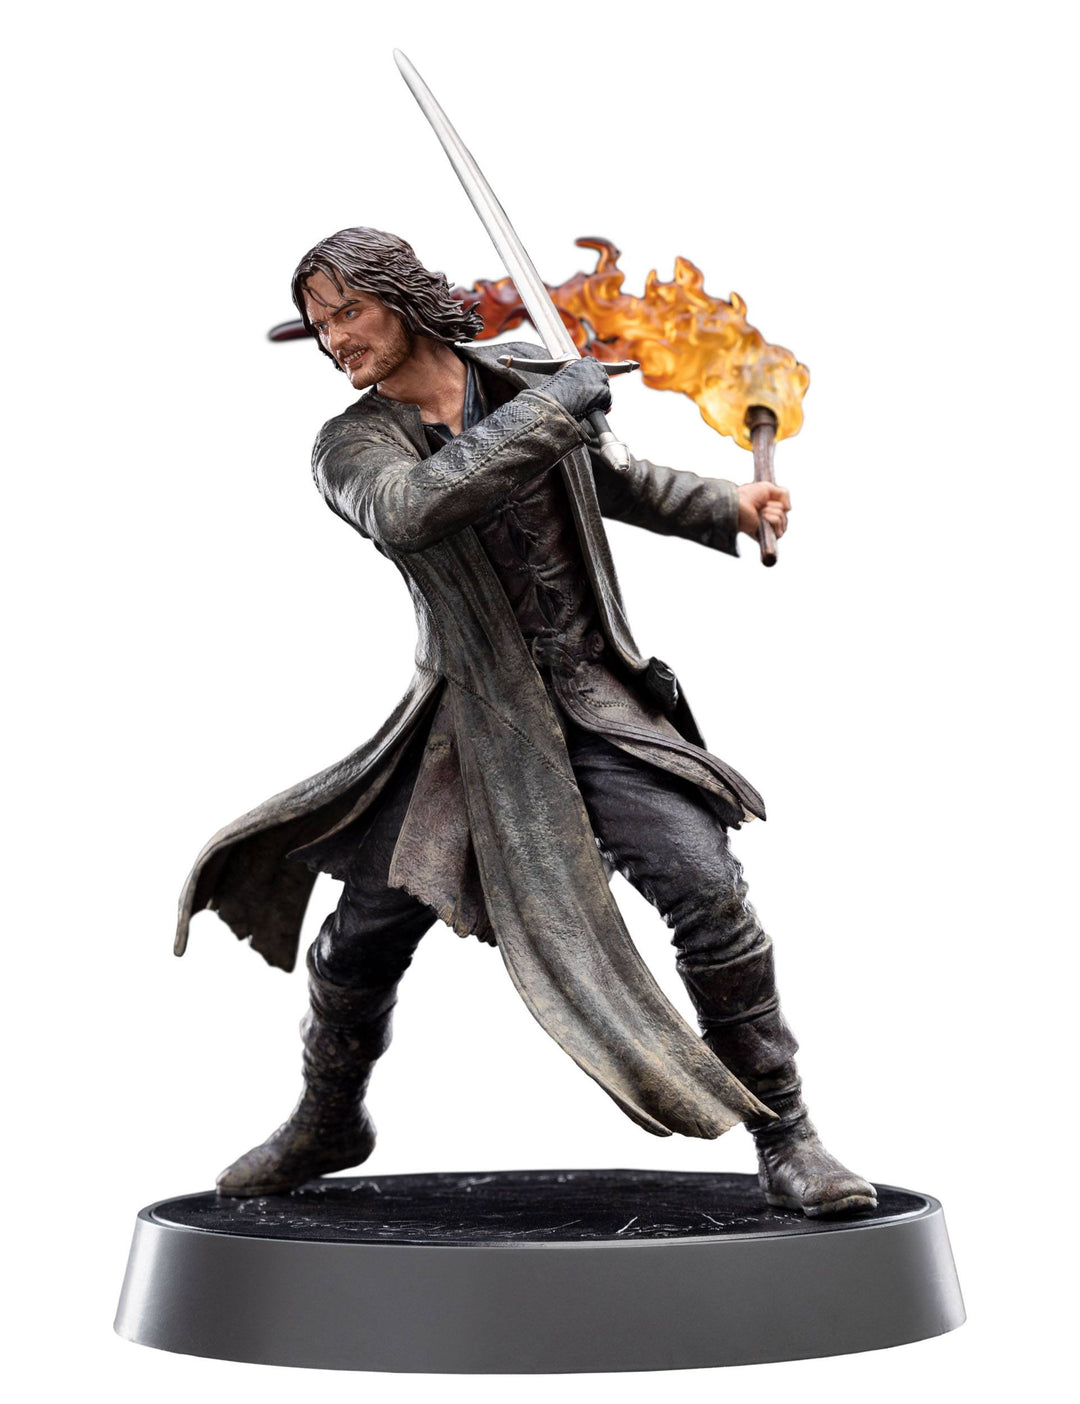 Official The Lord of the Rings Figures of Fandom Aragorn Figure